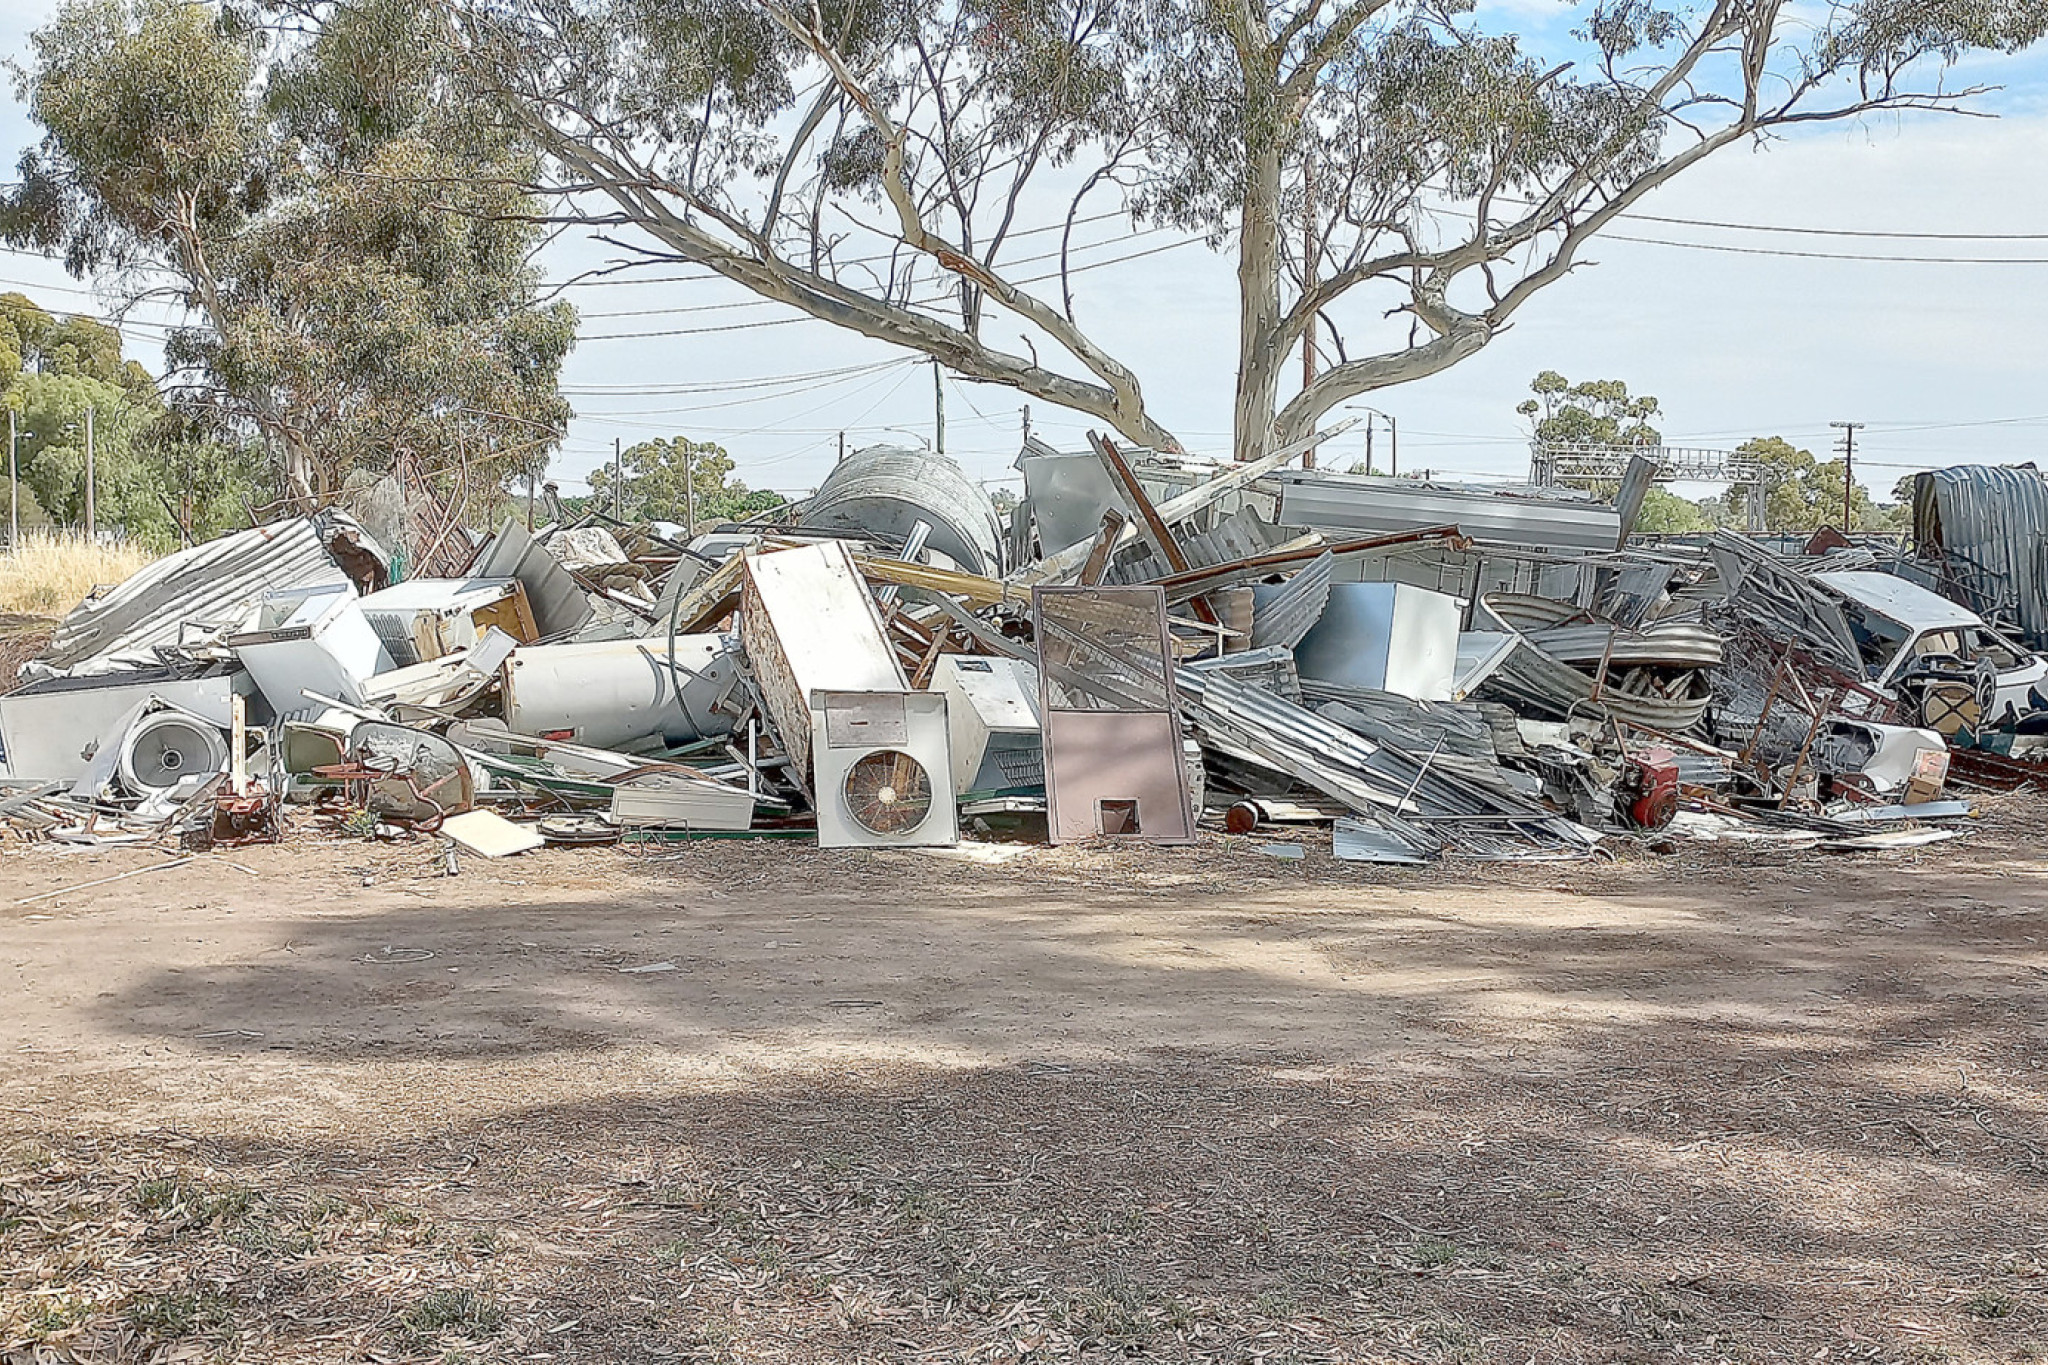 This collection point is meant to be for the Dimboola Lions Club fundraising - instead, locals are dumping their general rubbish at the site.